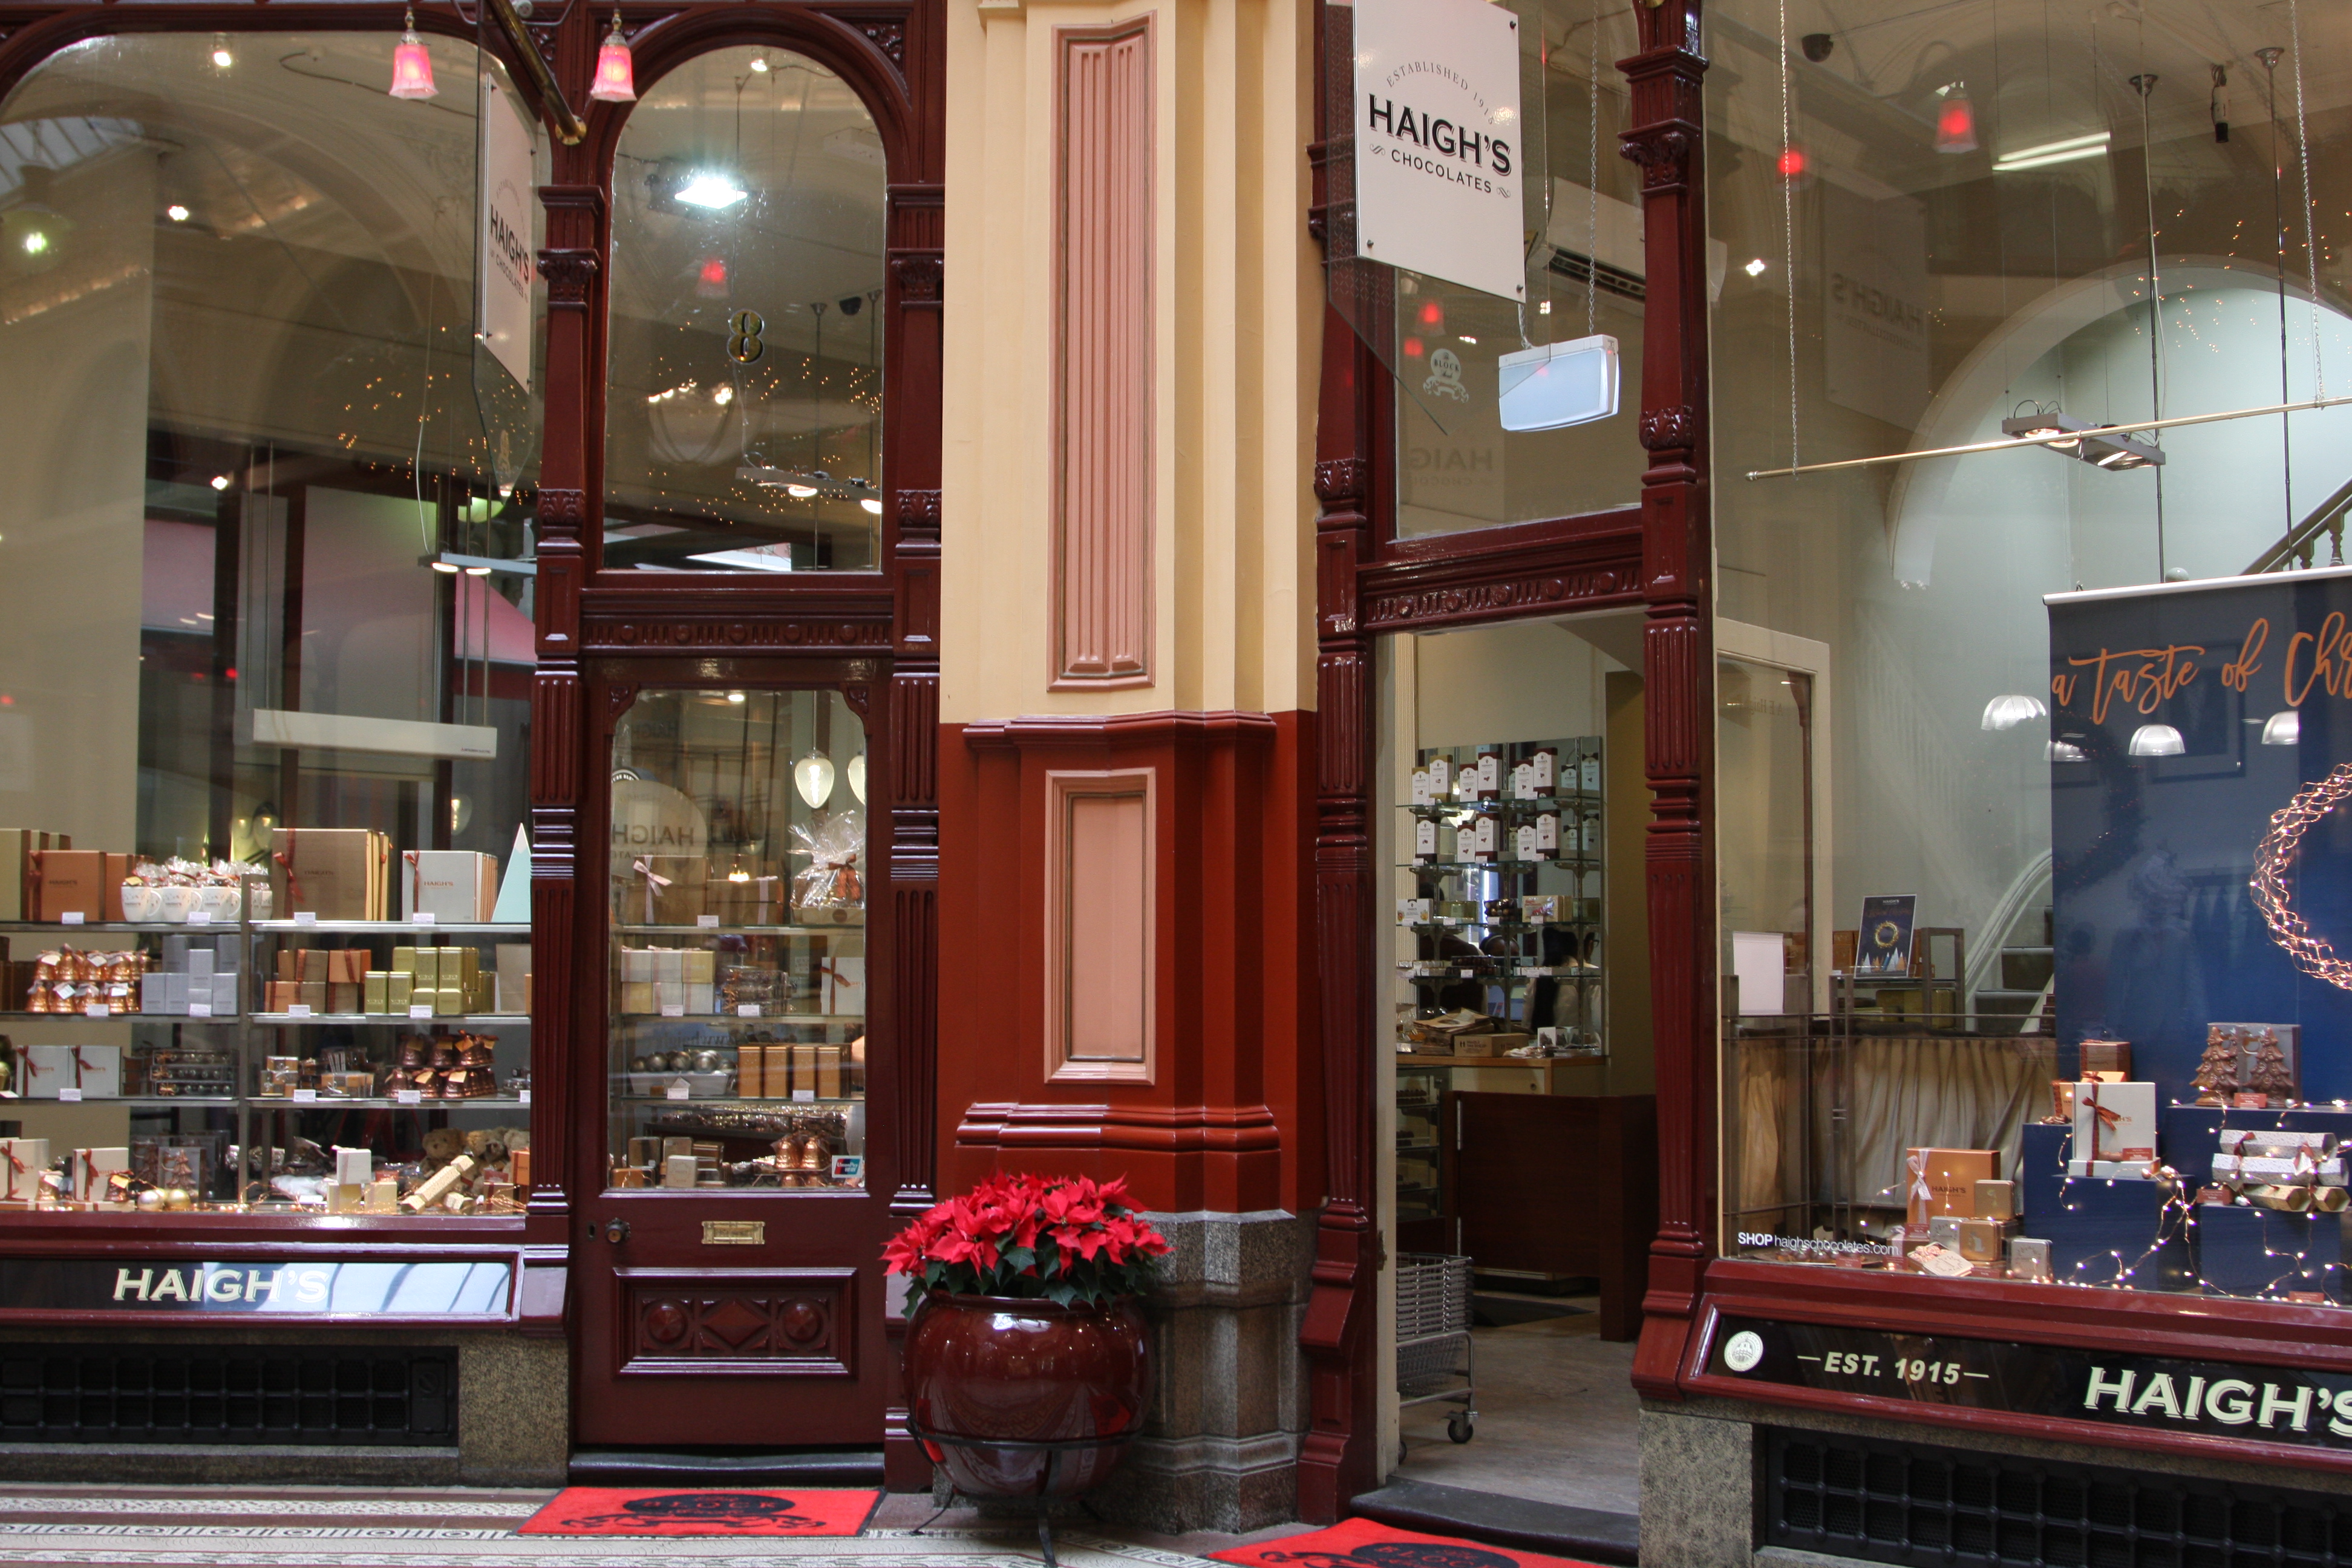 outside the Haigh's Chocolates Store in Melbourne